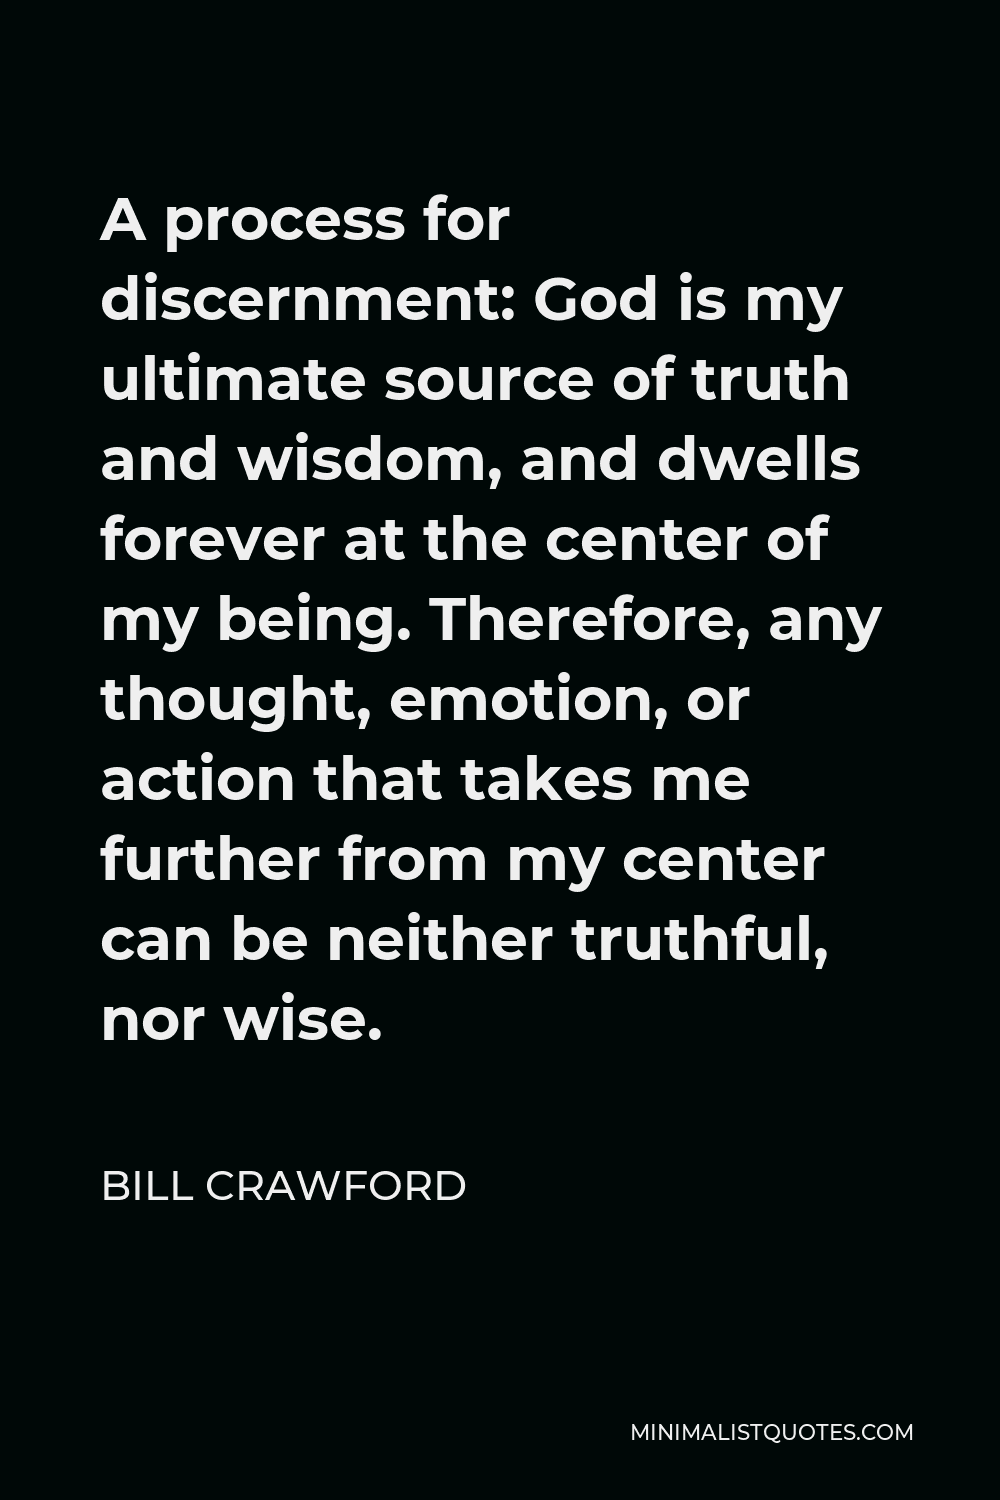 Bill Crawford Quote - A process for discernment: God is my ultimate source of truth and wisdom, and dwells forever at the center of my being. Therefore, any thought, emotion, or action that takes me further from my center can be neither truthful, nor wise.